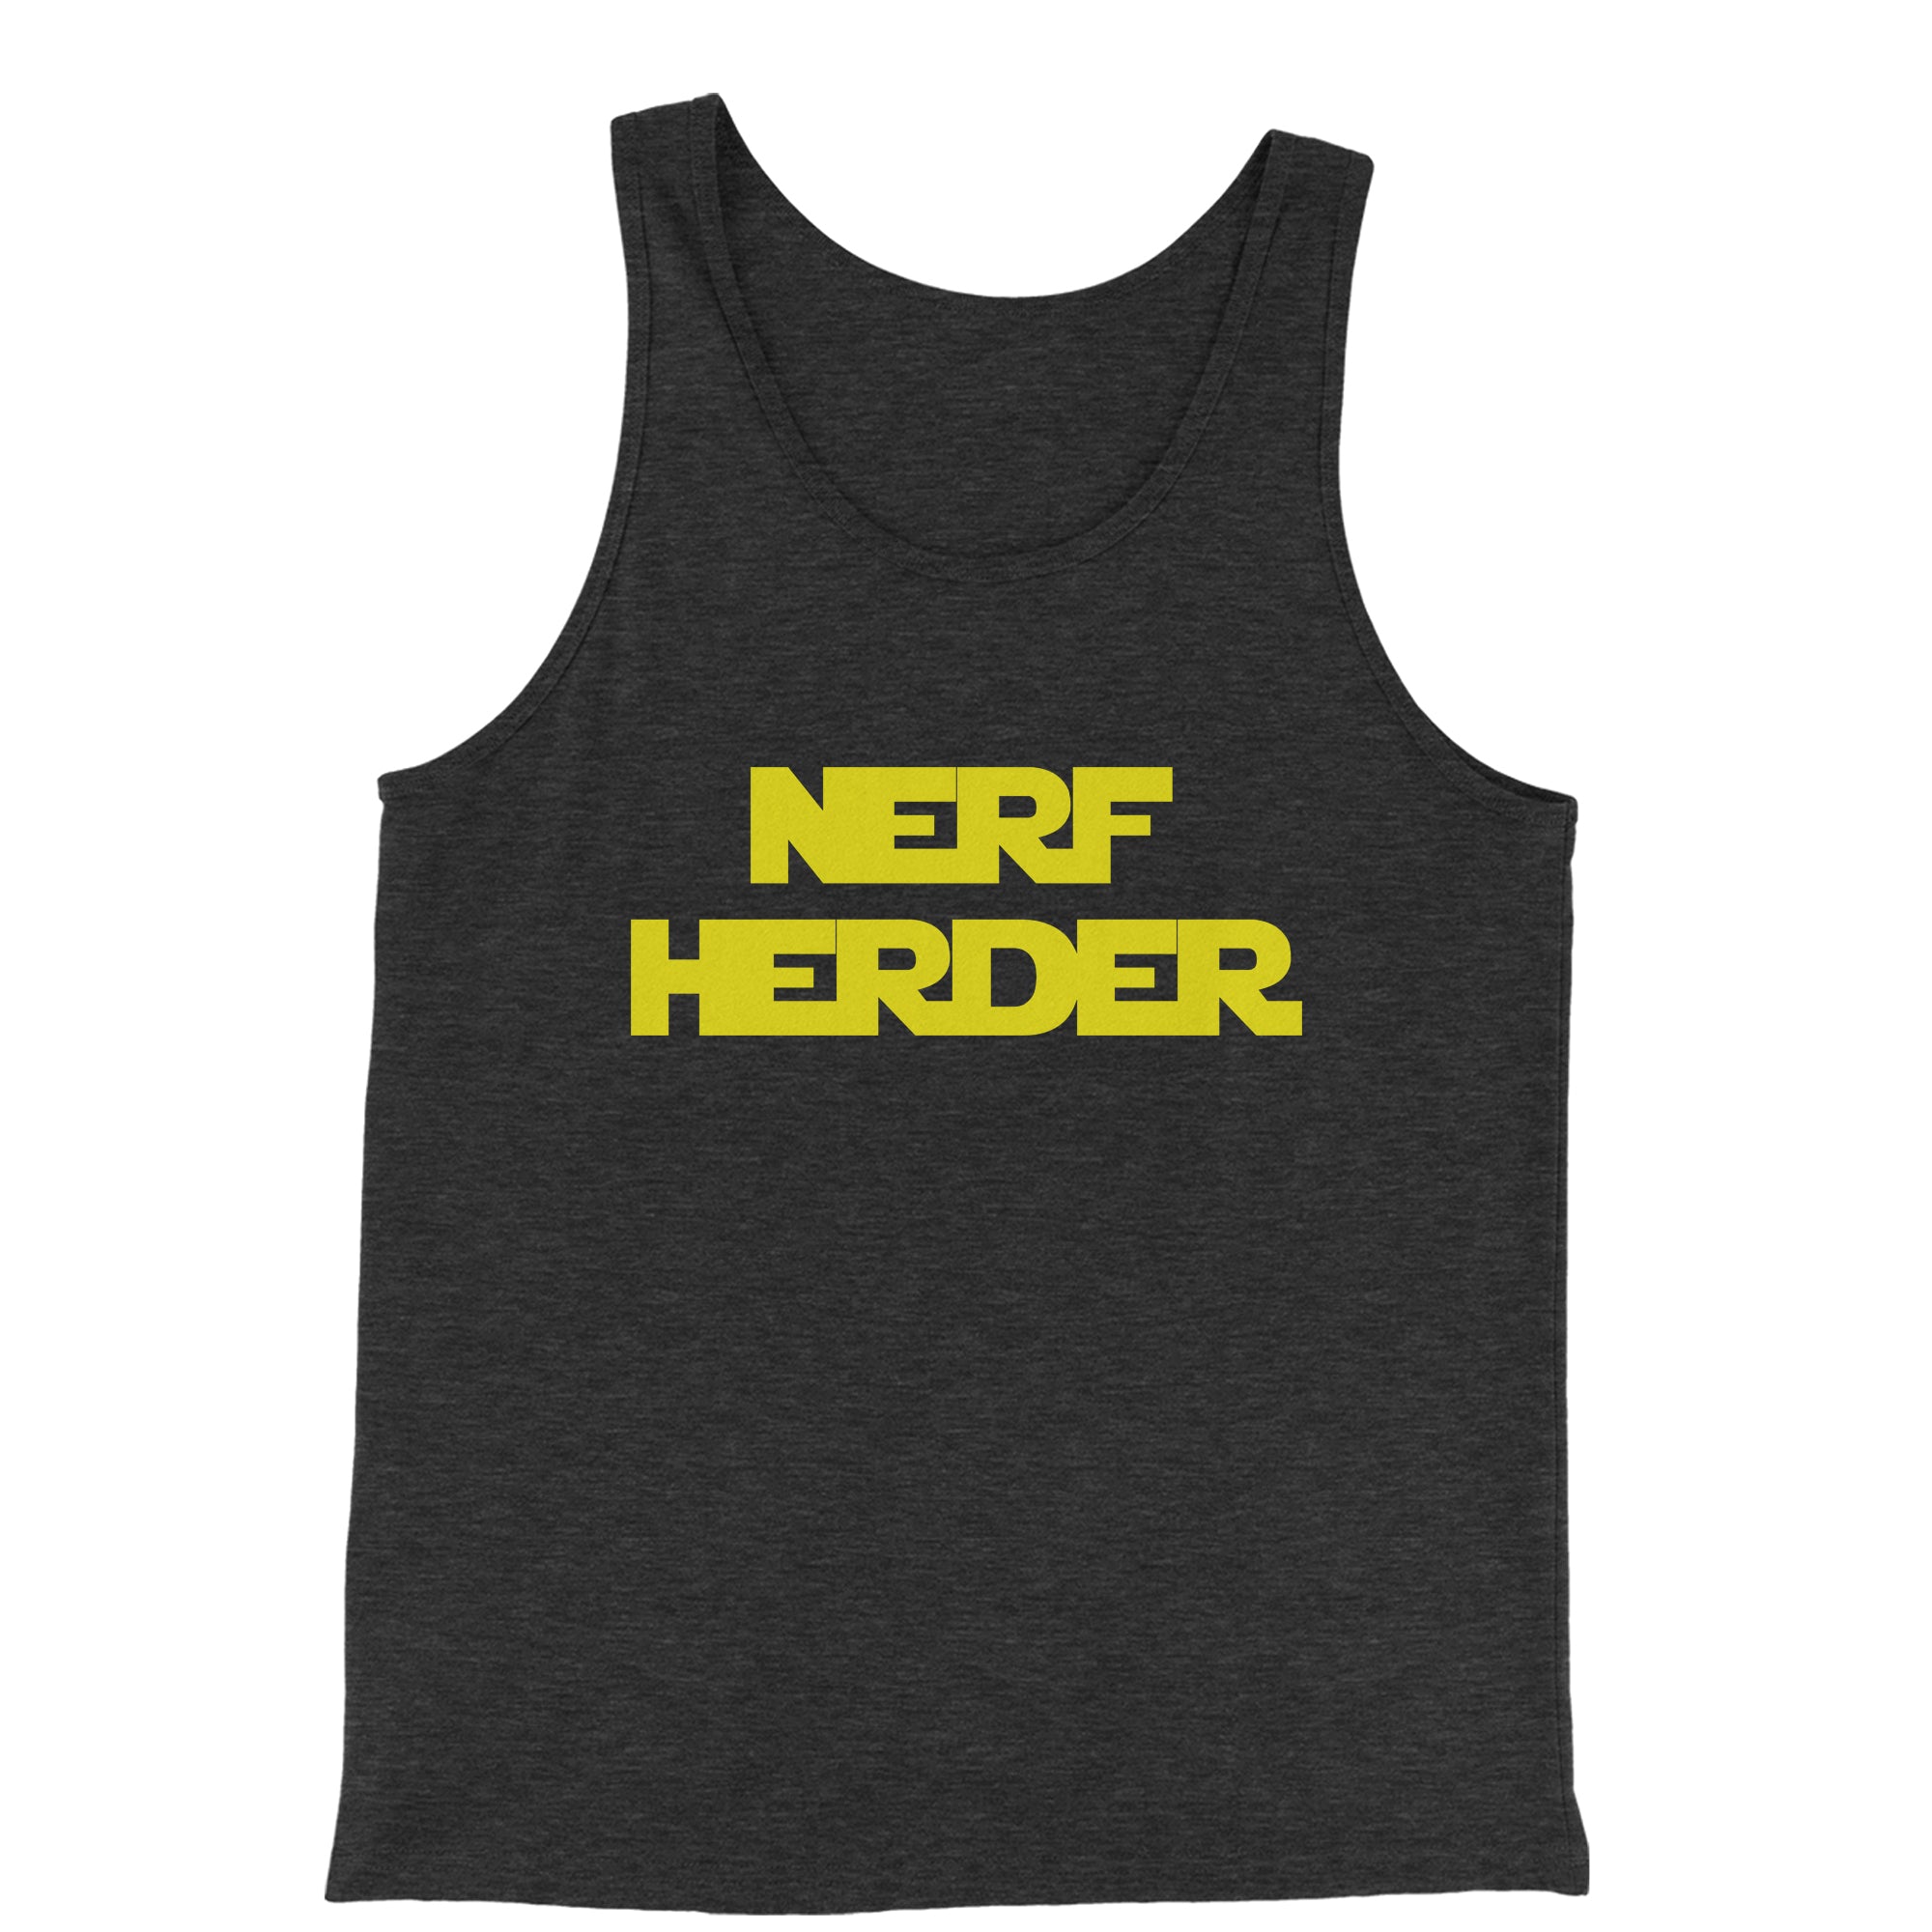 Solo Nerf Herder Quote Men's Jersey Tank